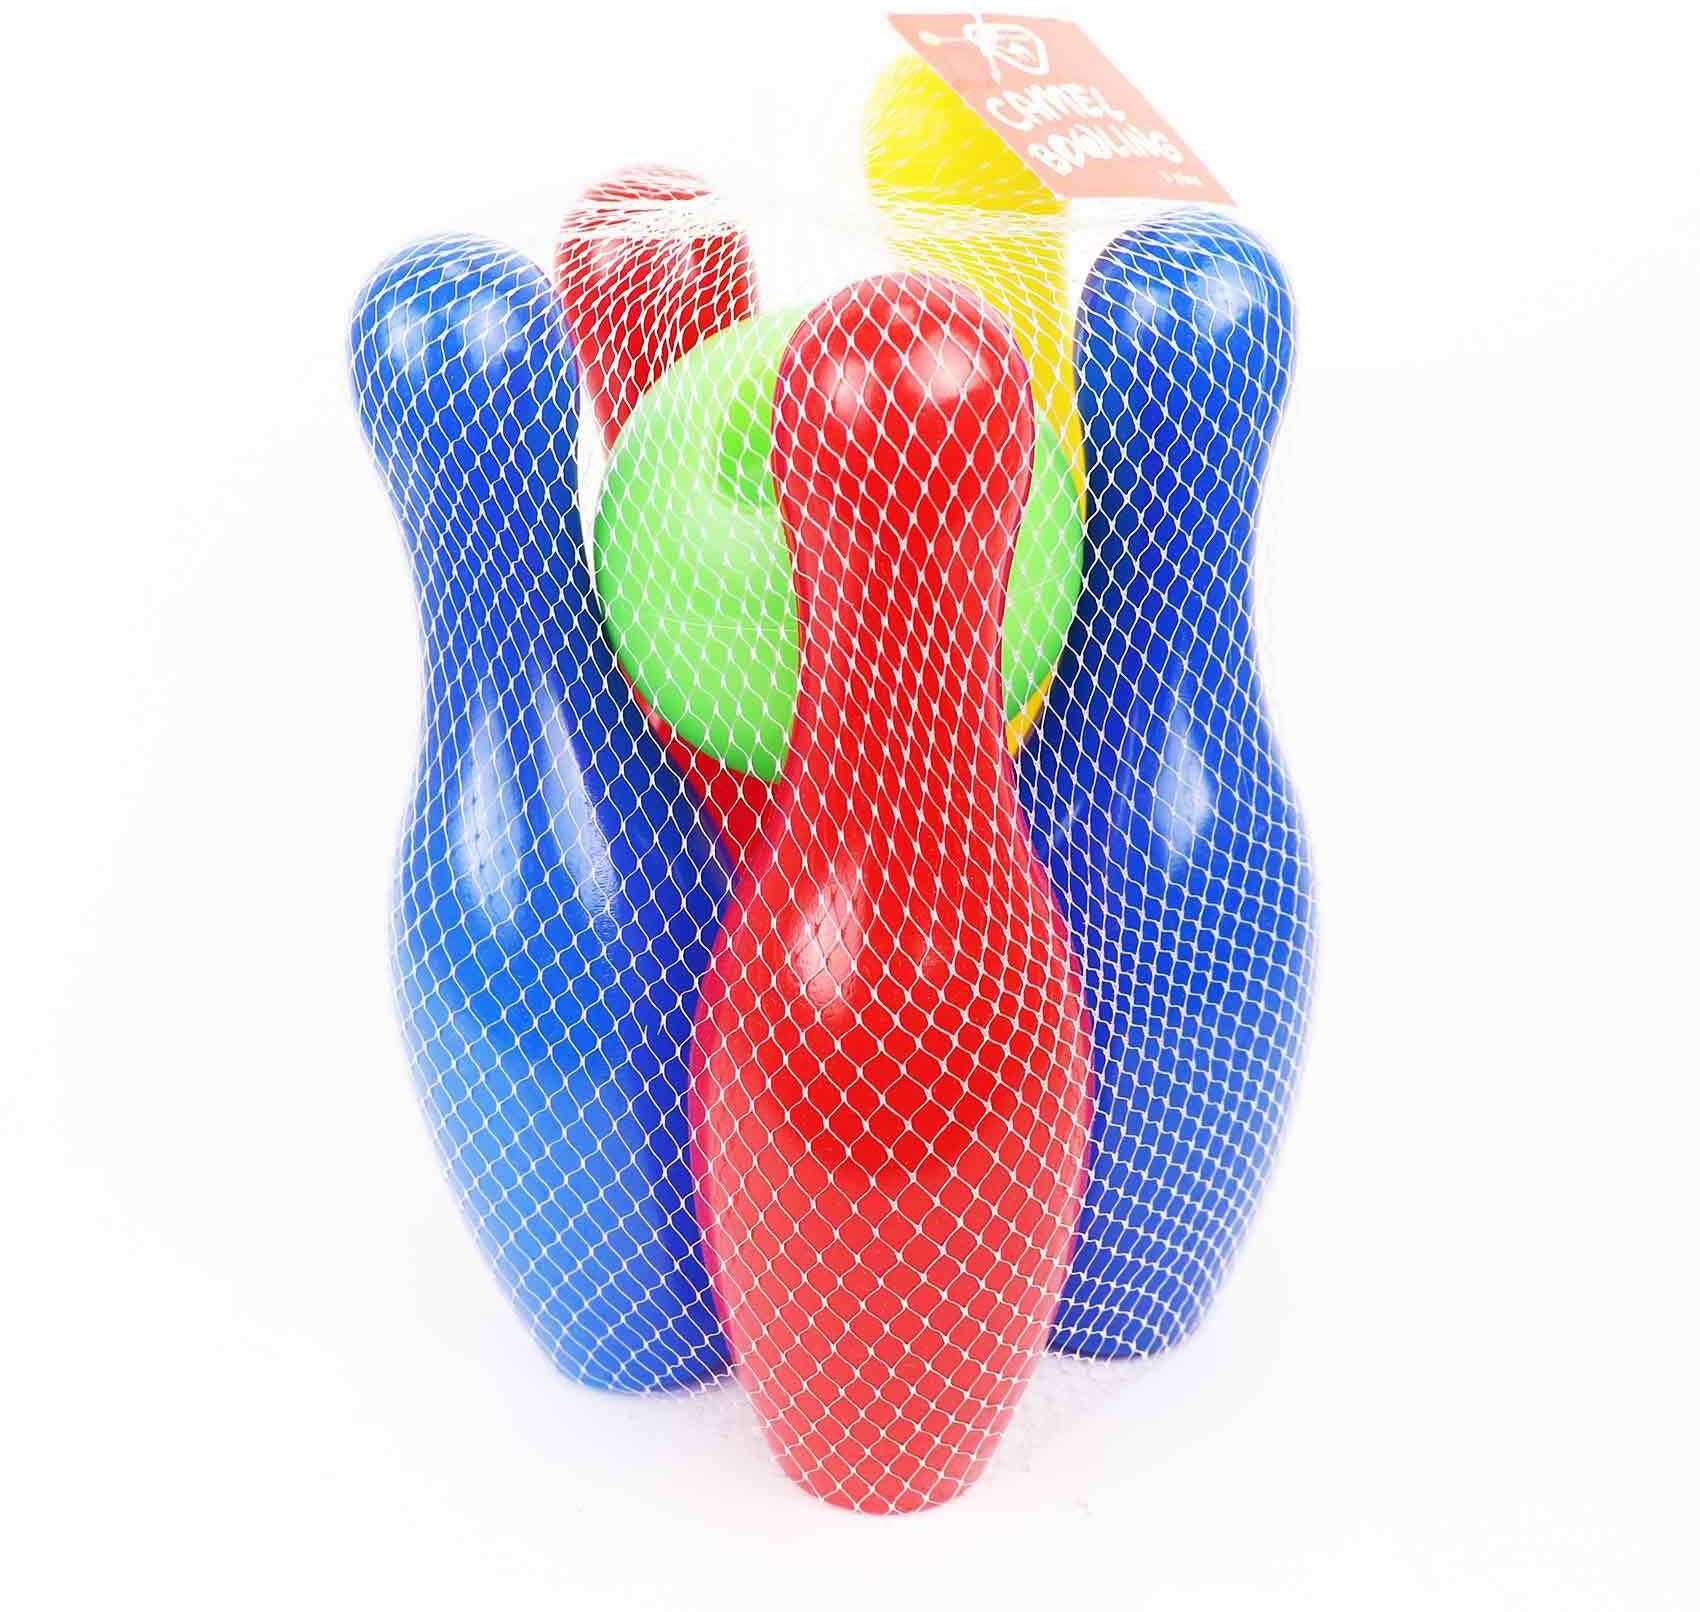 Bowling Set in Net - 6 Pieces